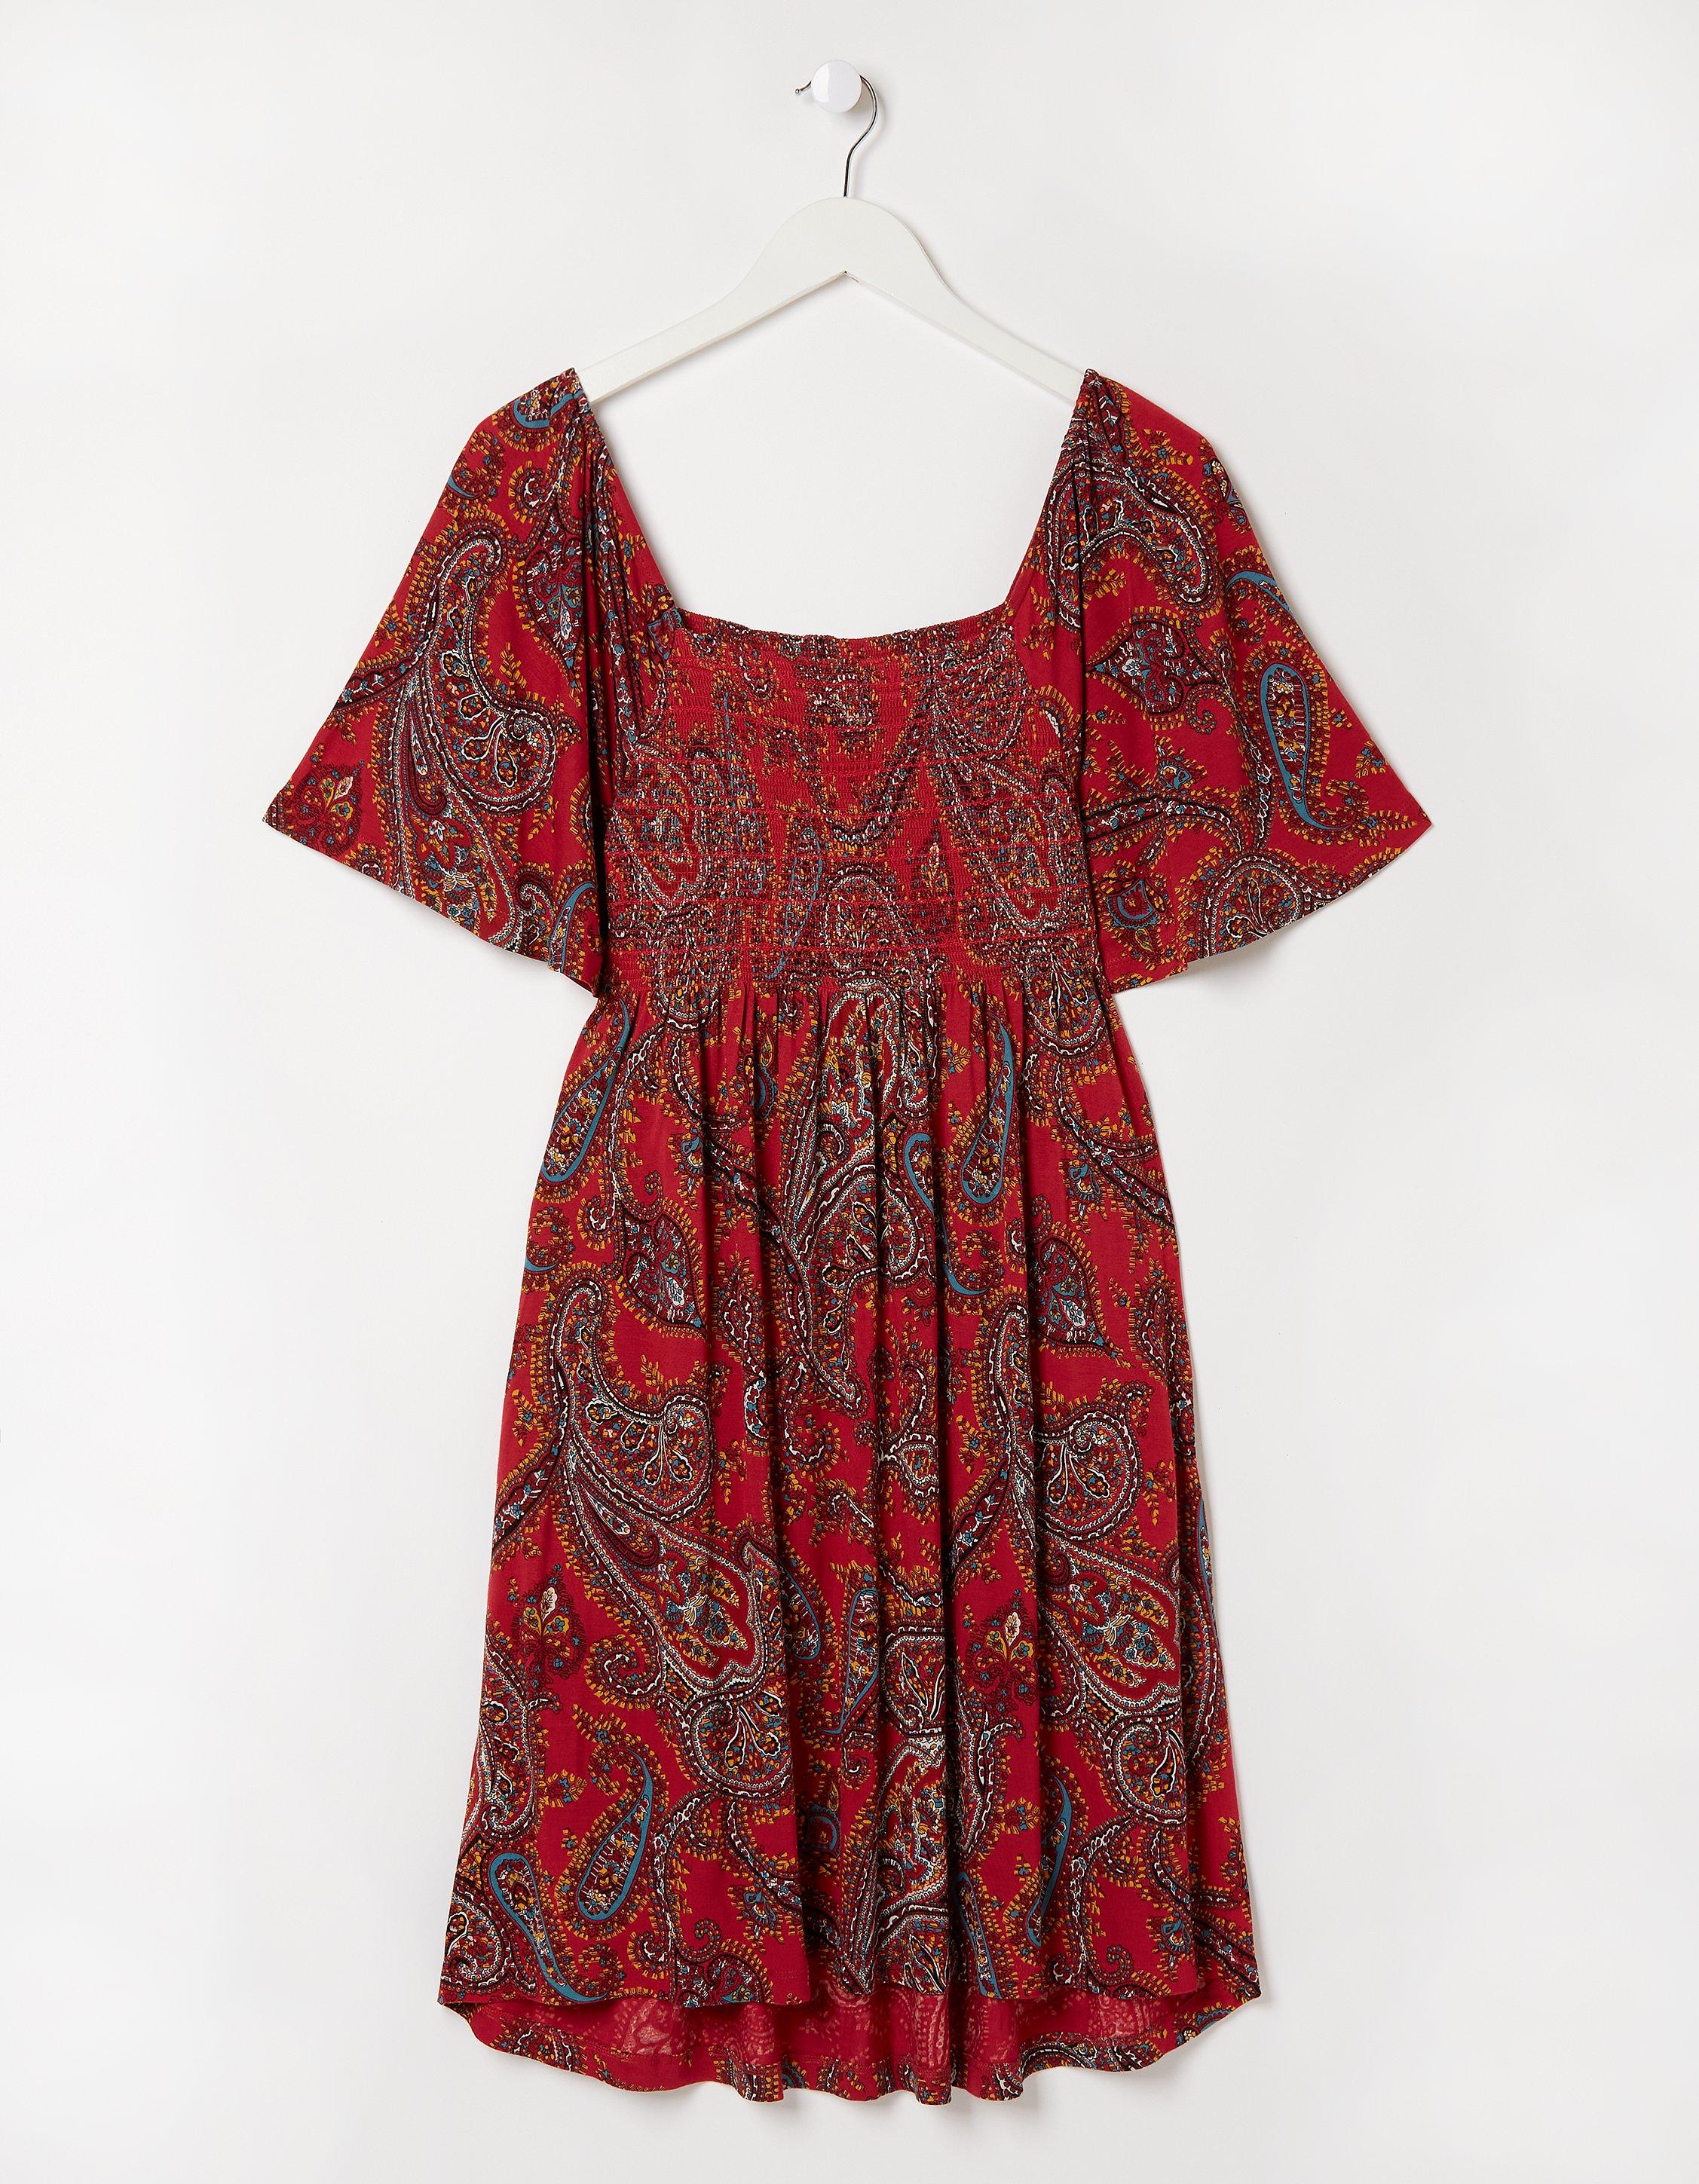 Alice Sunkissed Paisley Jersey Dress, Dresses